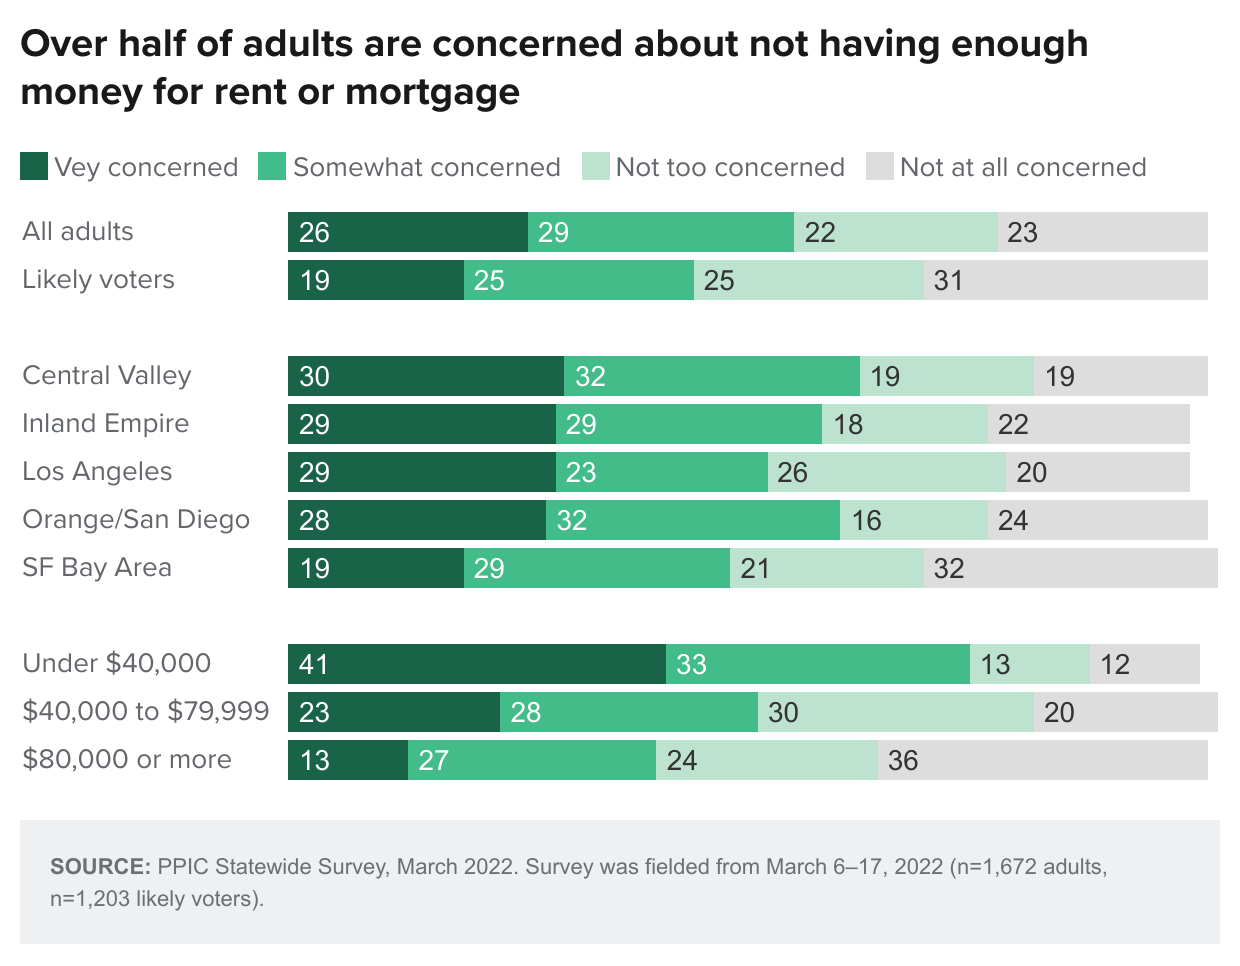 figure - Over half of adults are concerned about not having enough money for rent or mortgage